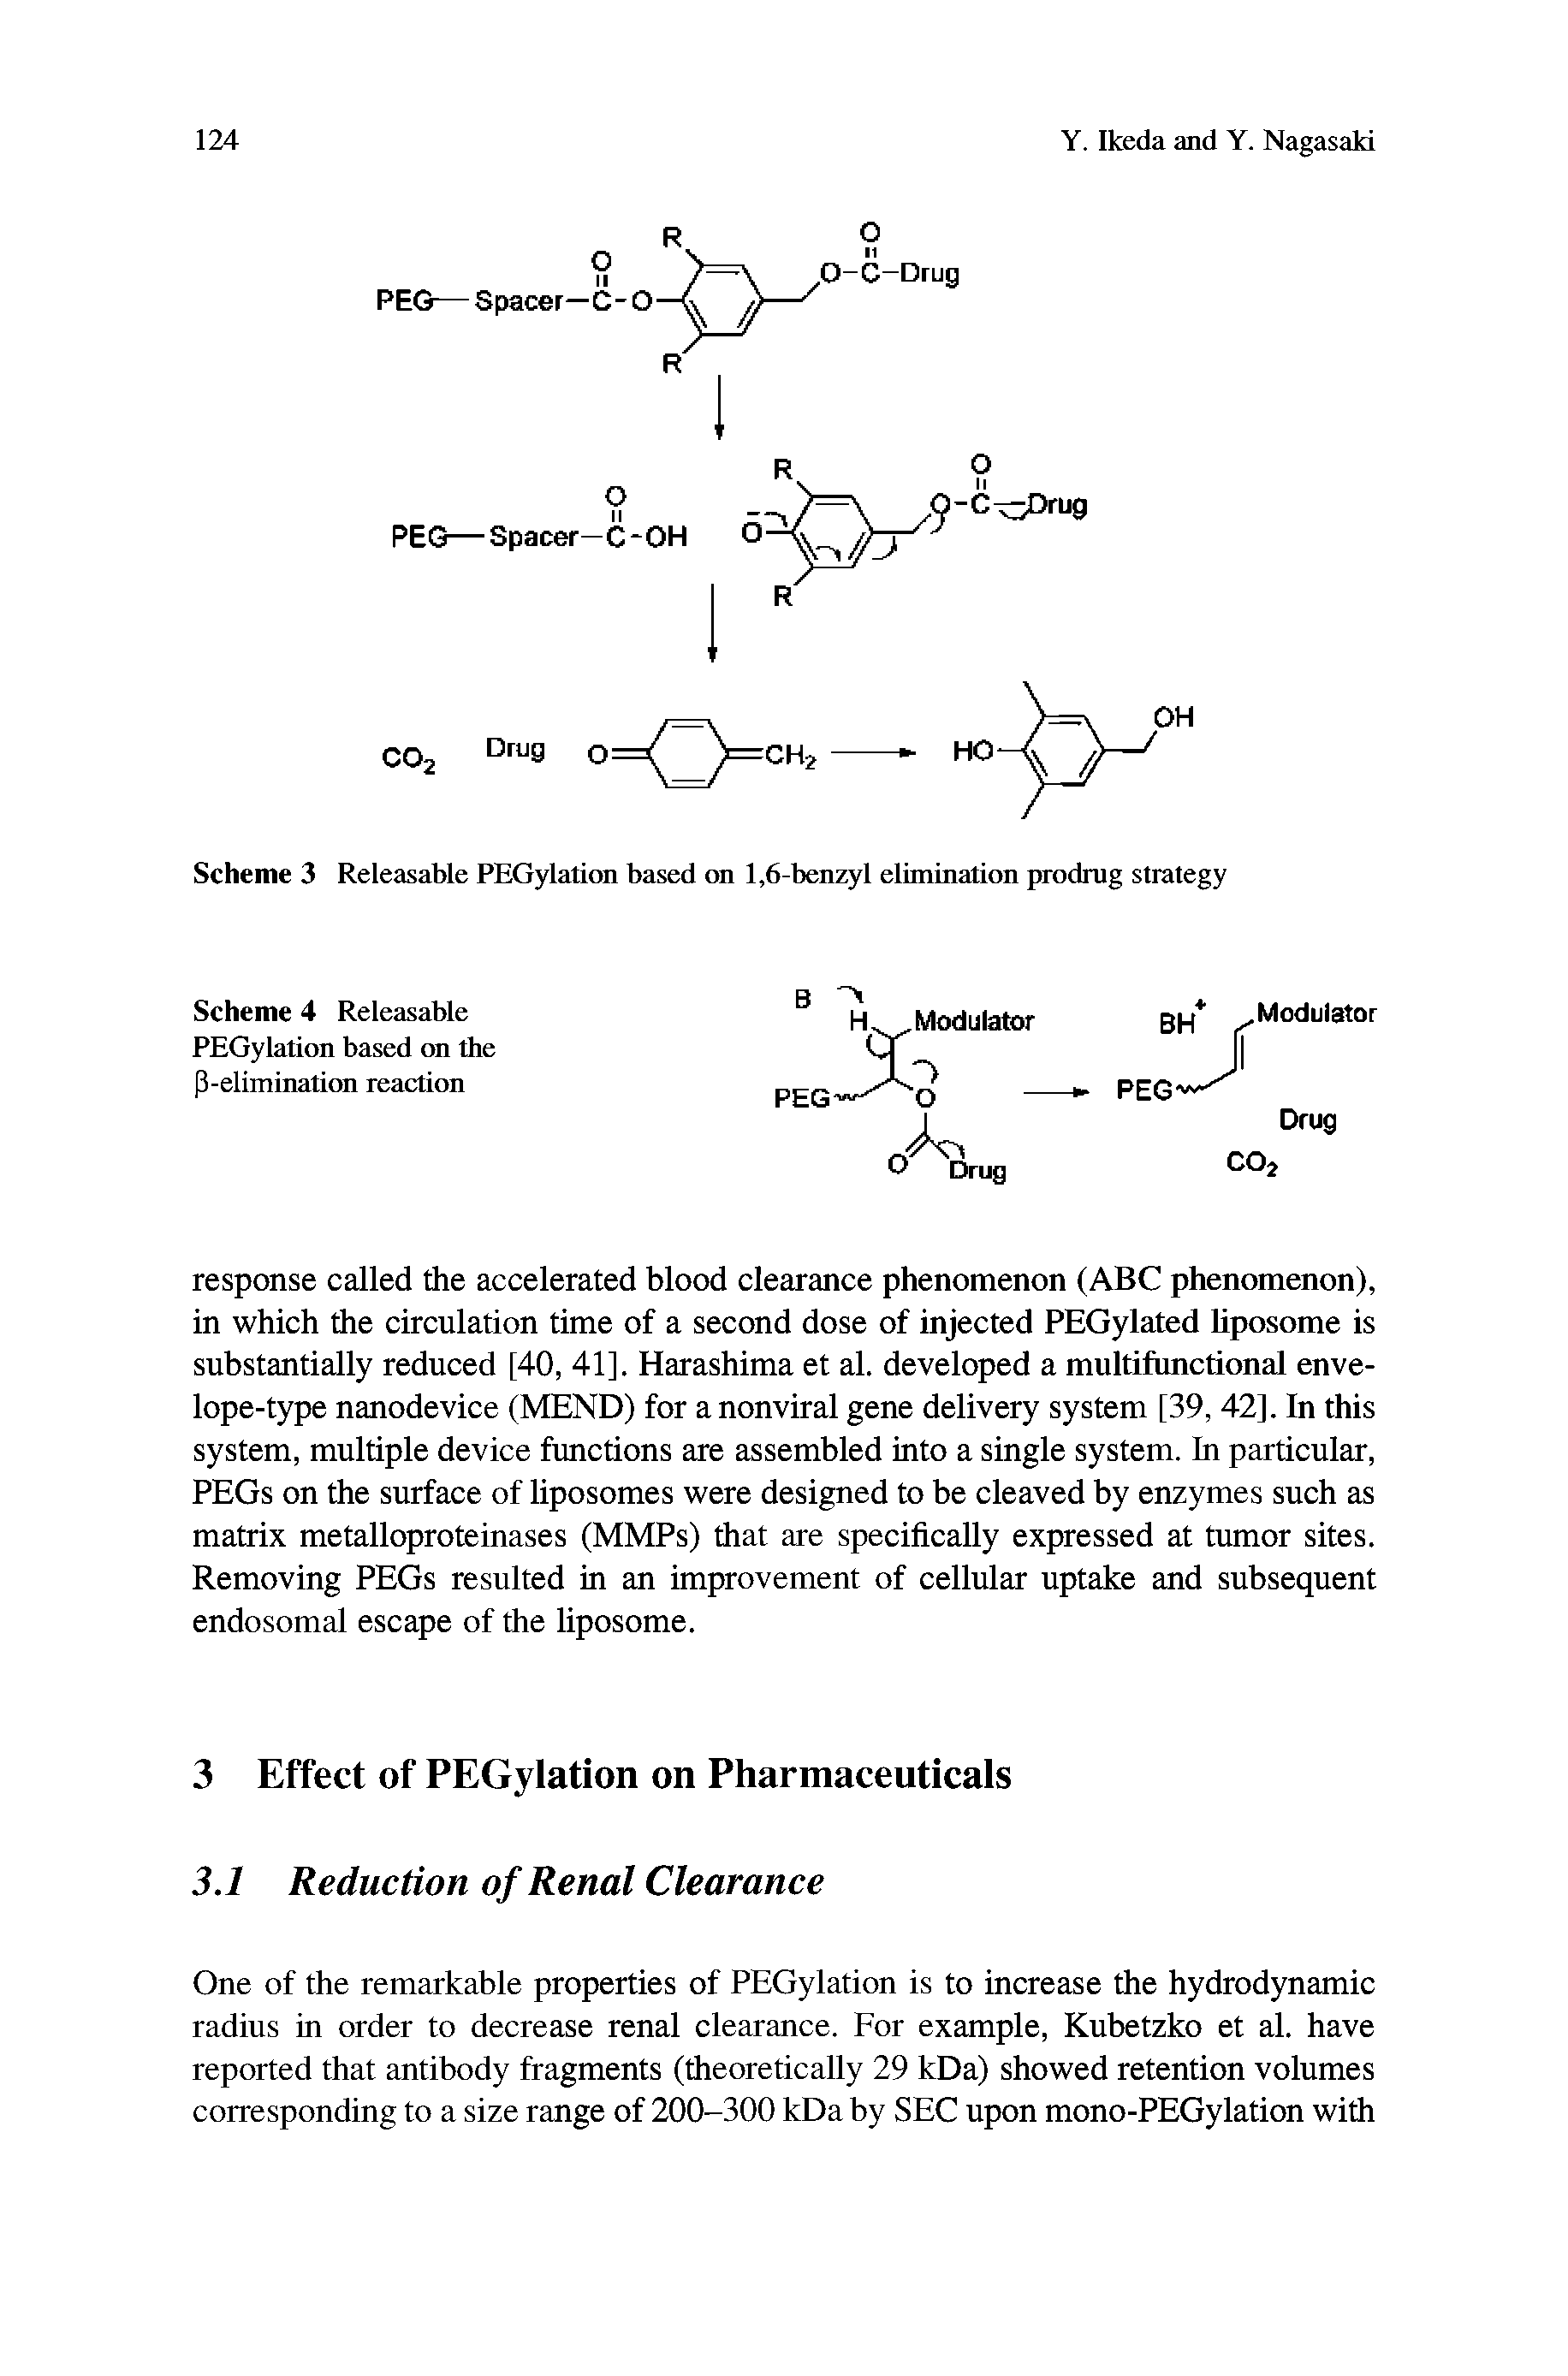 Scheme 4 Releasable PEGylation based on the (3-elimination reaction...